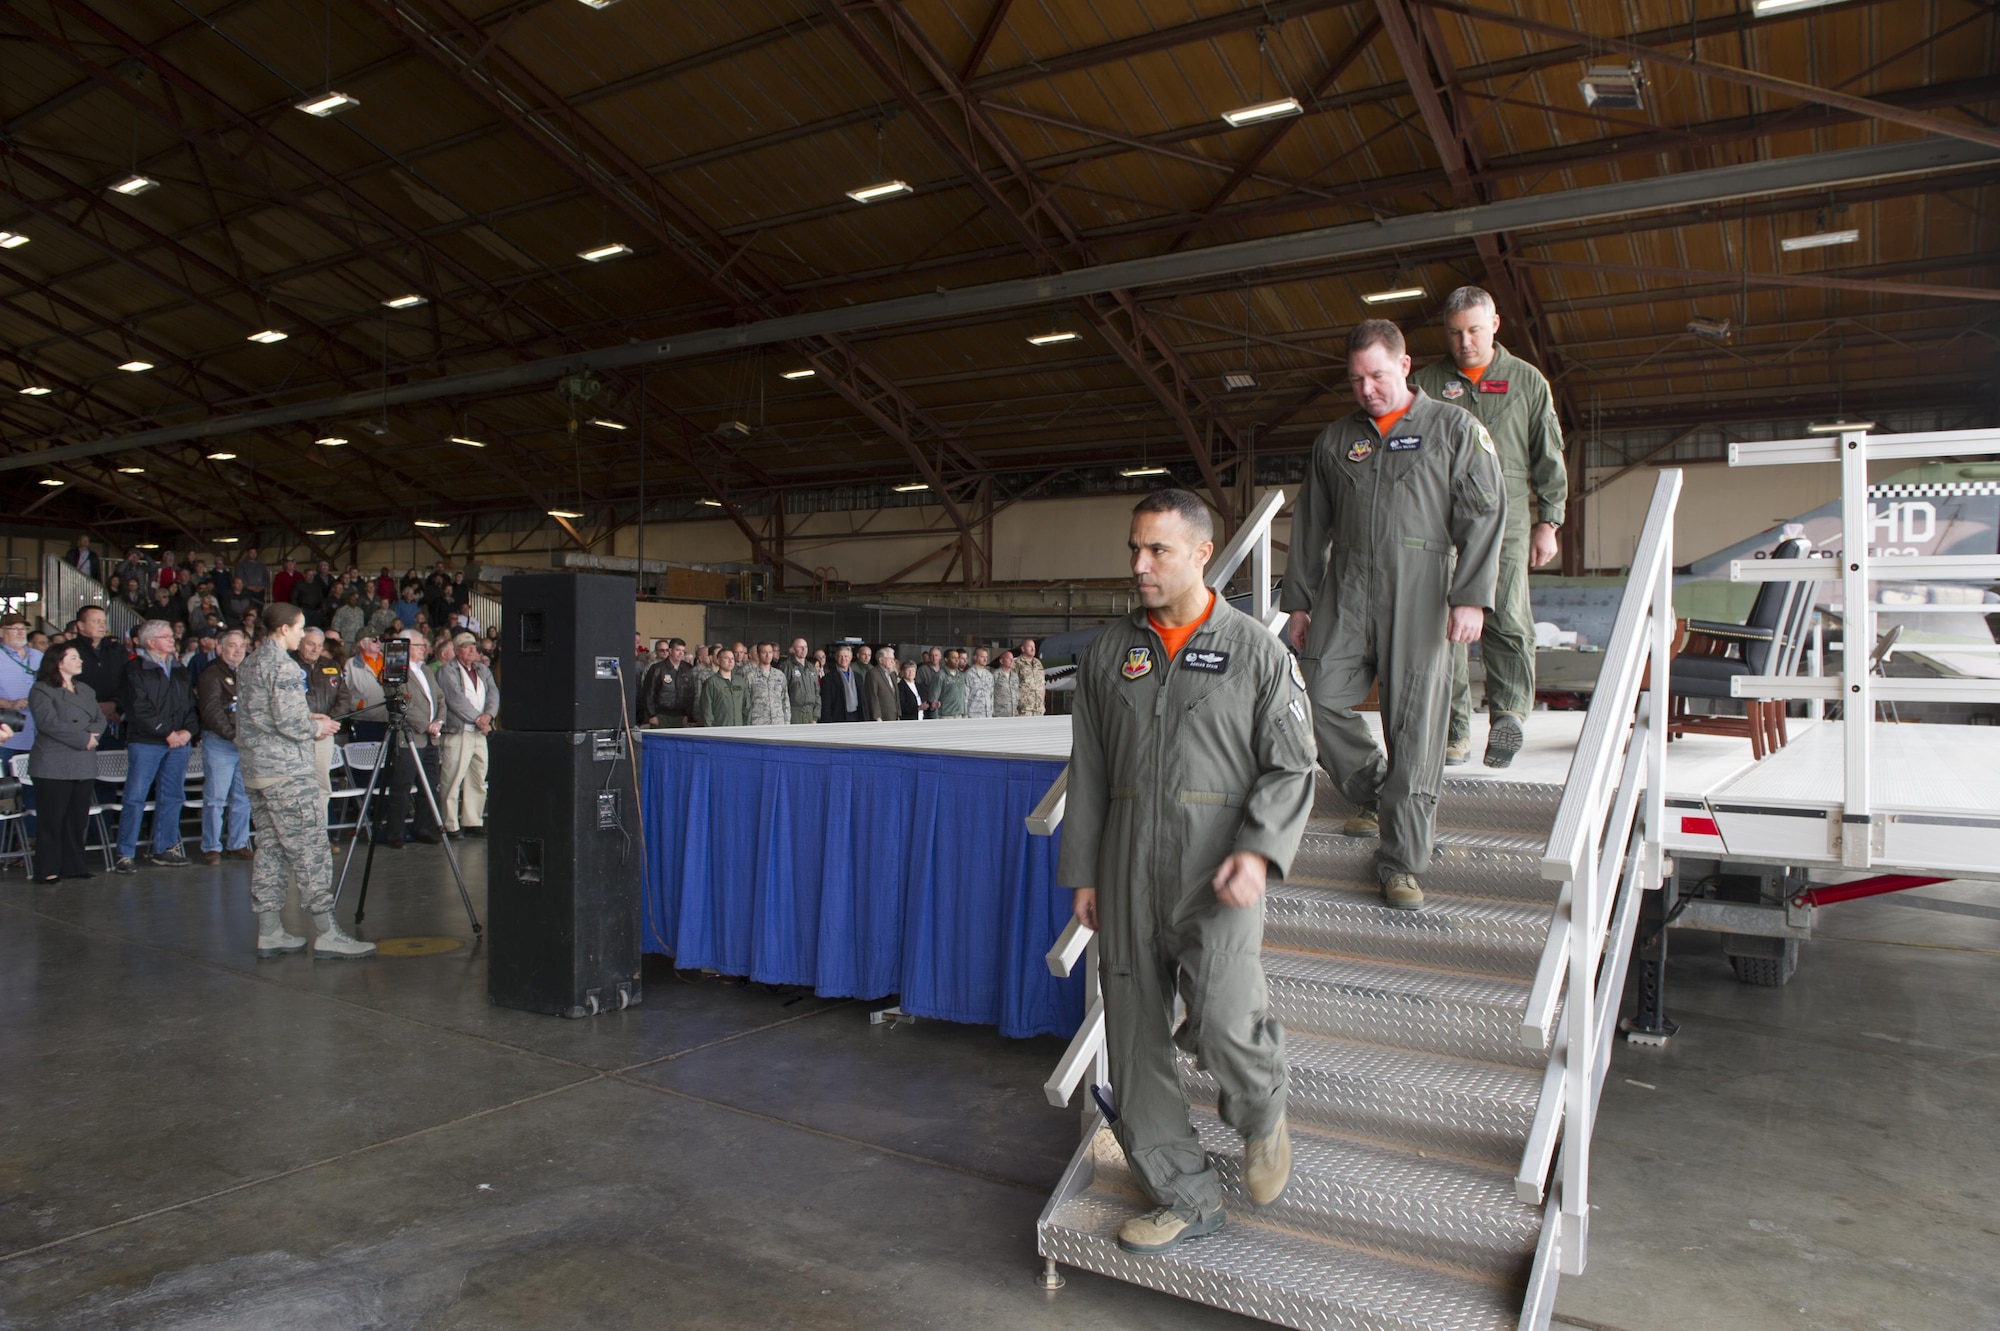 Col. Adrian Spain (bottom), 53rd Wing commander; Col. Lance Wilkins (middle), 53rd Weapons Evaluation Group commander; Lt. Col. Ronald King (top), 82nd Aerial Target Squadron, Det 1 commander, leave the stage after providing their comments during the QF-4 Phinal Phlight ceremony Dec. 21, 2016 at Holloman Air Force Base, N.M. Hundreds of people were in attendance to commemorate the aircraft’s retirement, marking the end of the aircraft’s 53 years of service to the Air Force. (U.S. Air Force photo by Master Sgt. Matthew McGovern)